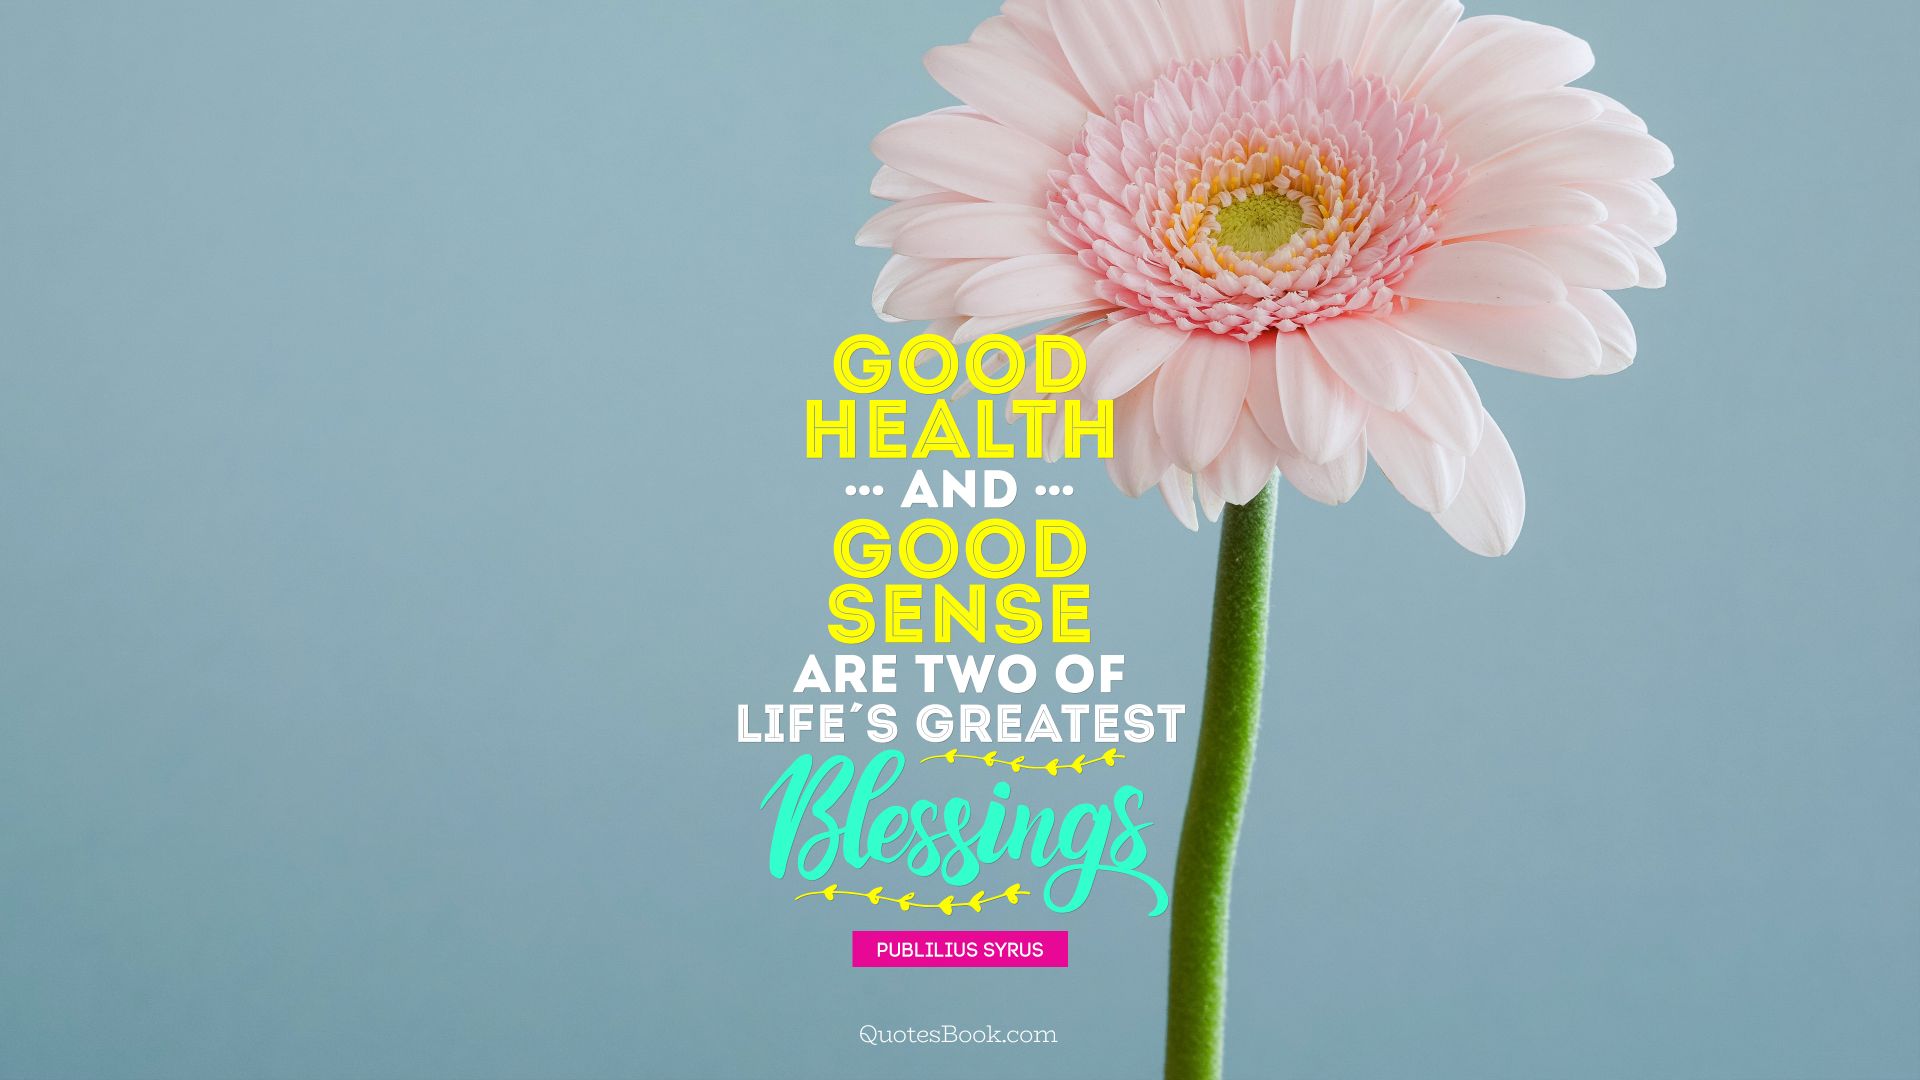 Good health and good sense are two of life's greatest blessings. - Quote by Publilius Syrus